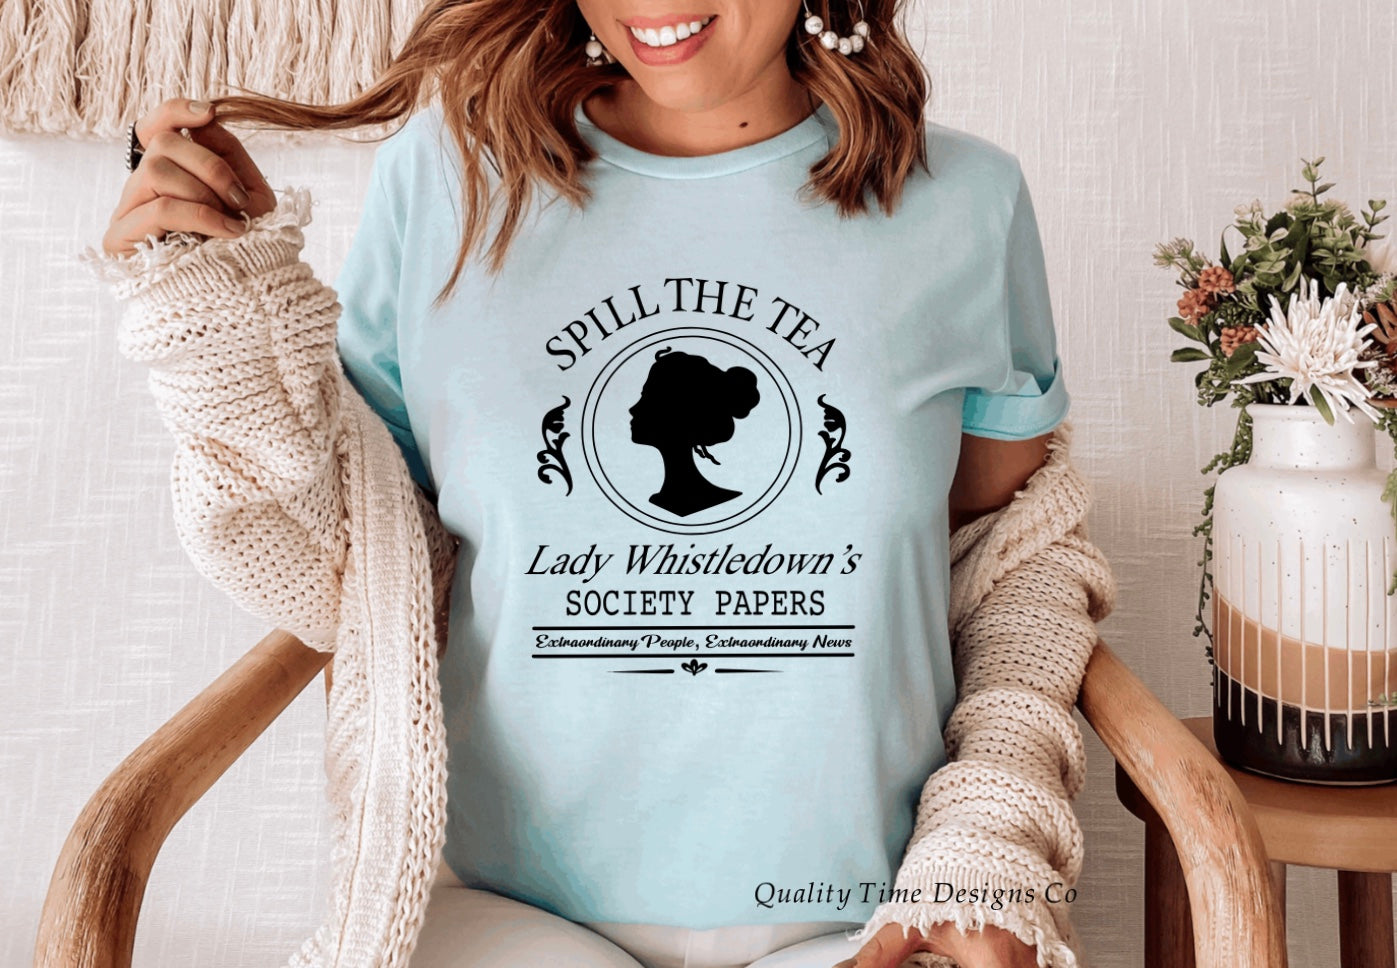 Lady Whistledowns society paper t-shirt 